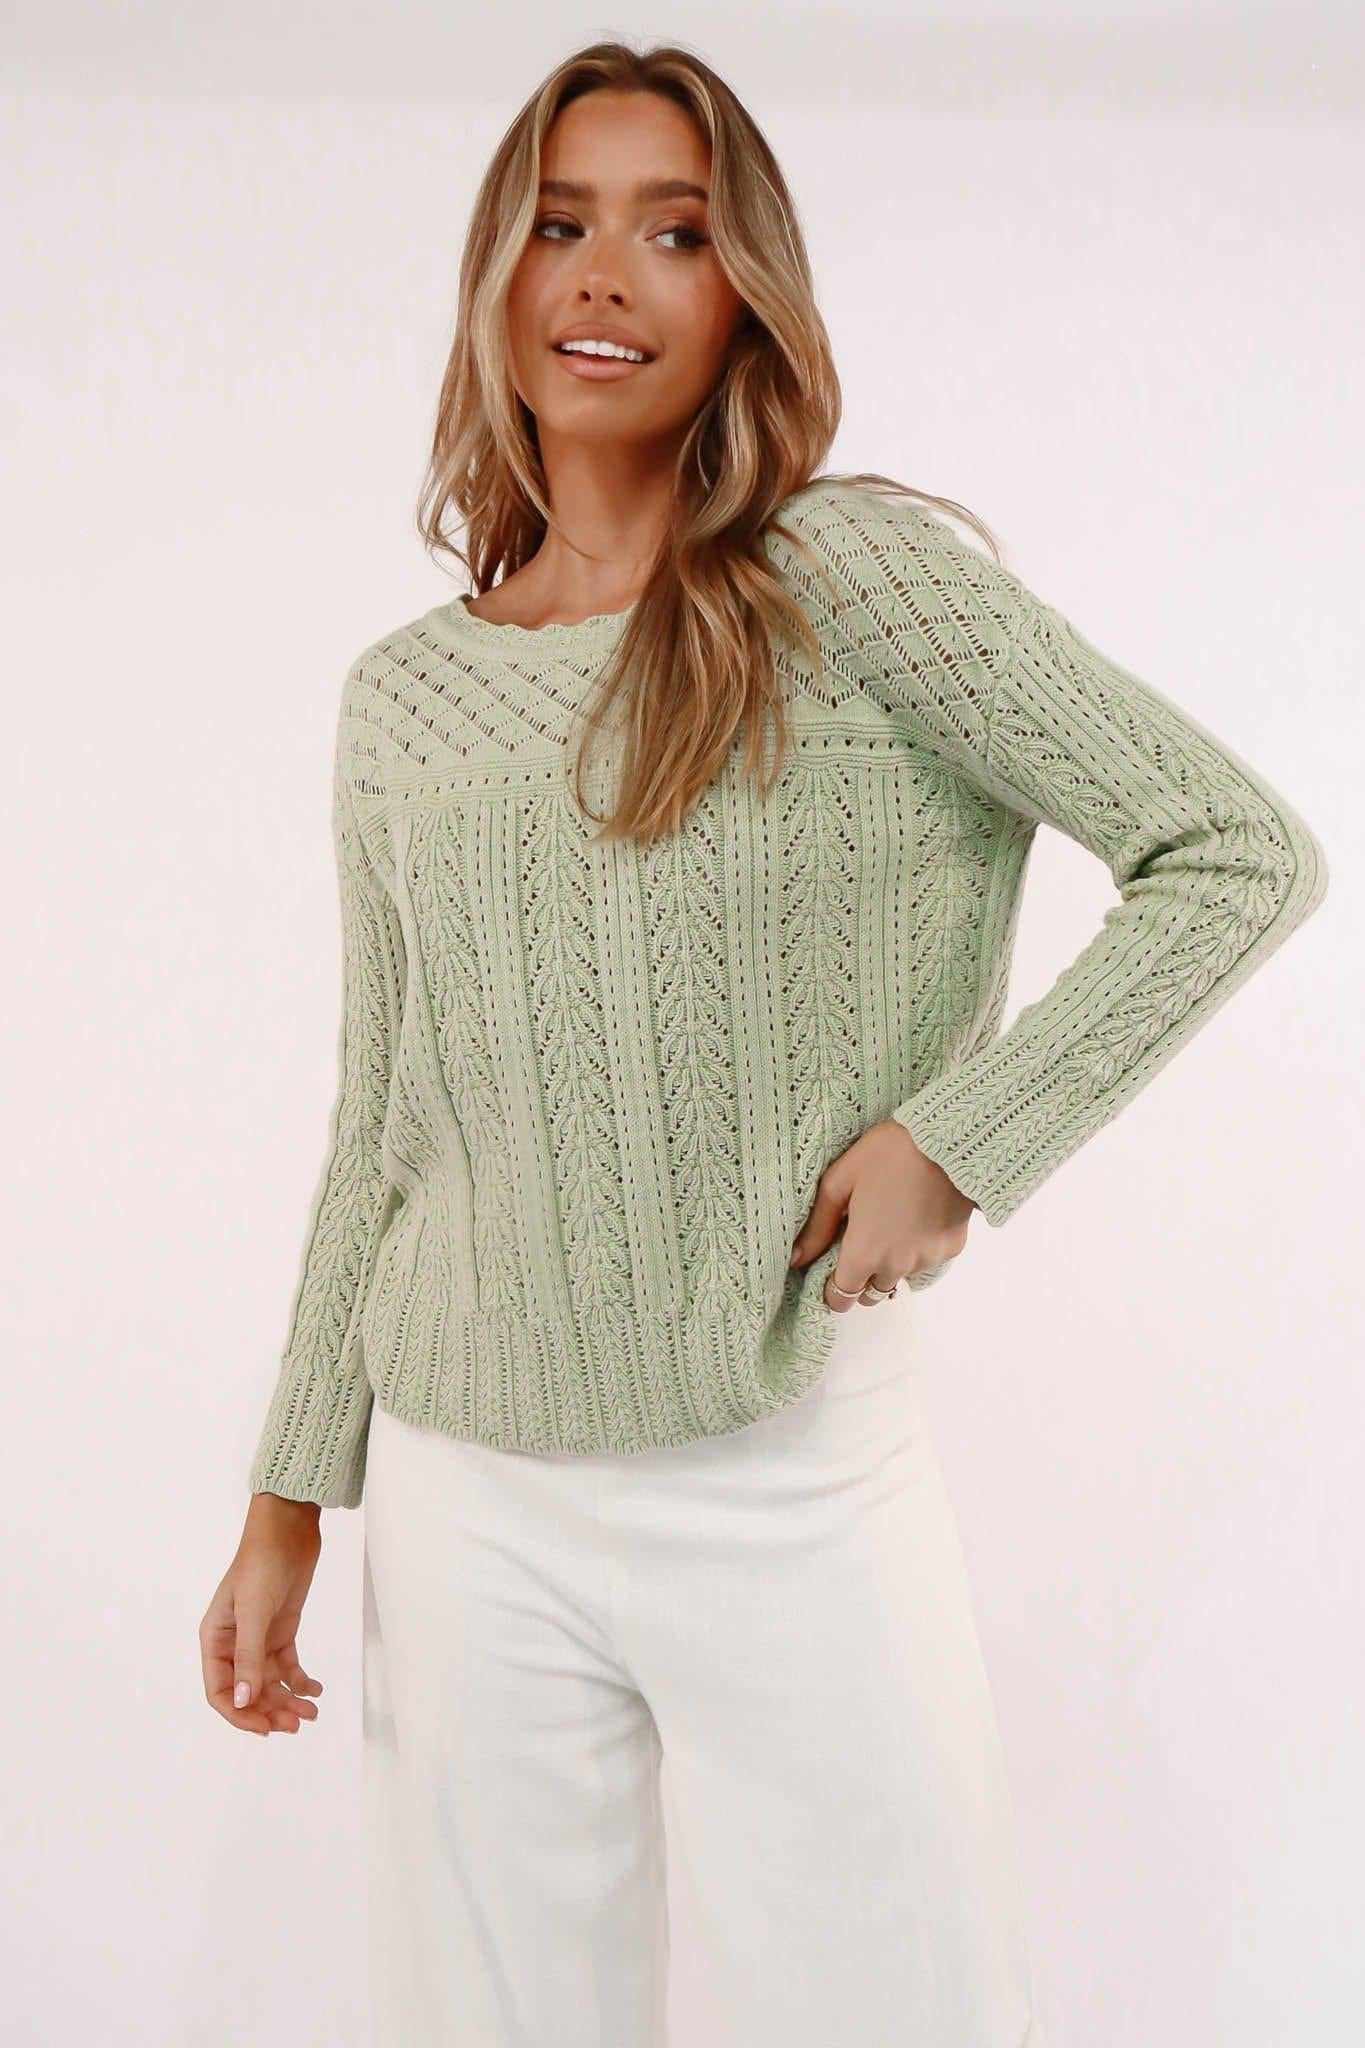 Lornia Top, COTTON, GREEN, LONG SLEEVE, TOP, TOPS, Our New Lornia Top Is Now Only $61.00 Exclusive At Mishkah, Our New Lornia Top is now only $61.00-We Have The Latest Women's Tops @ Mishkah Online Fashion Boutique-MISHKAH